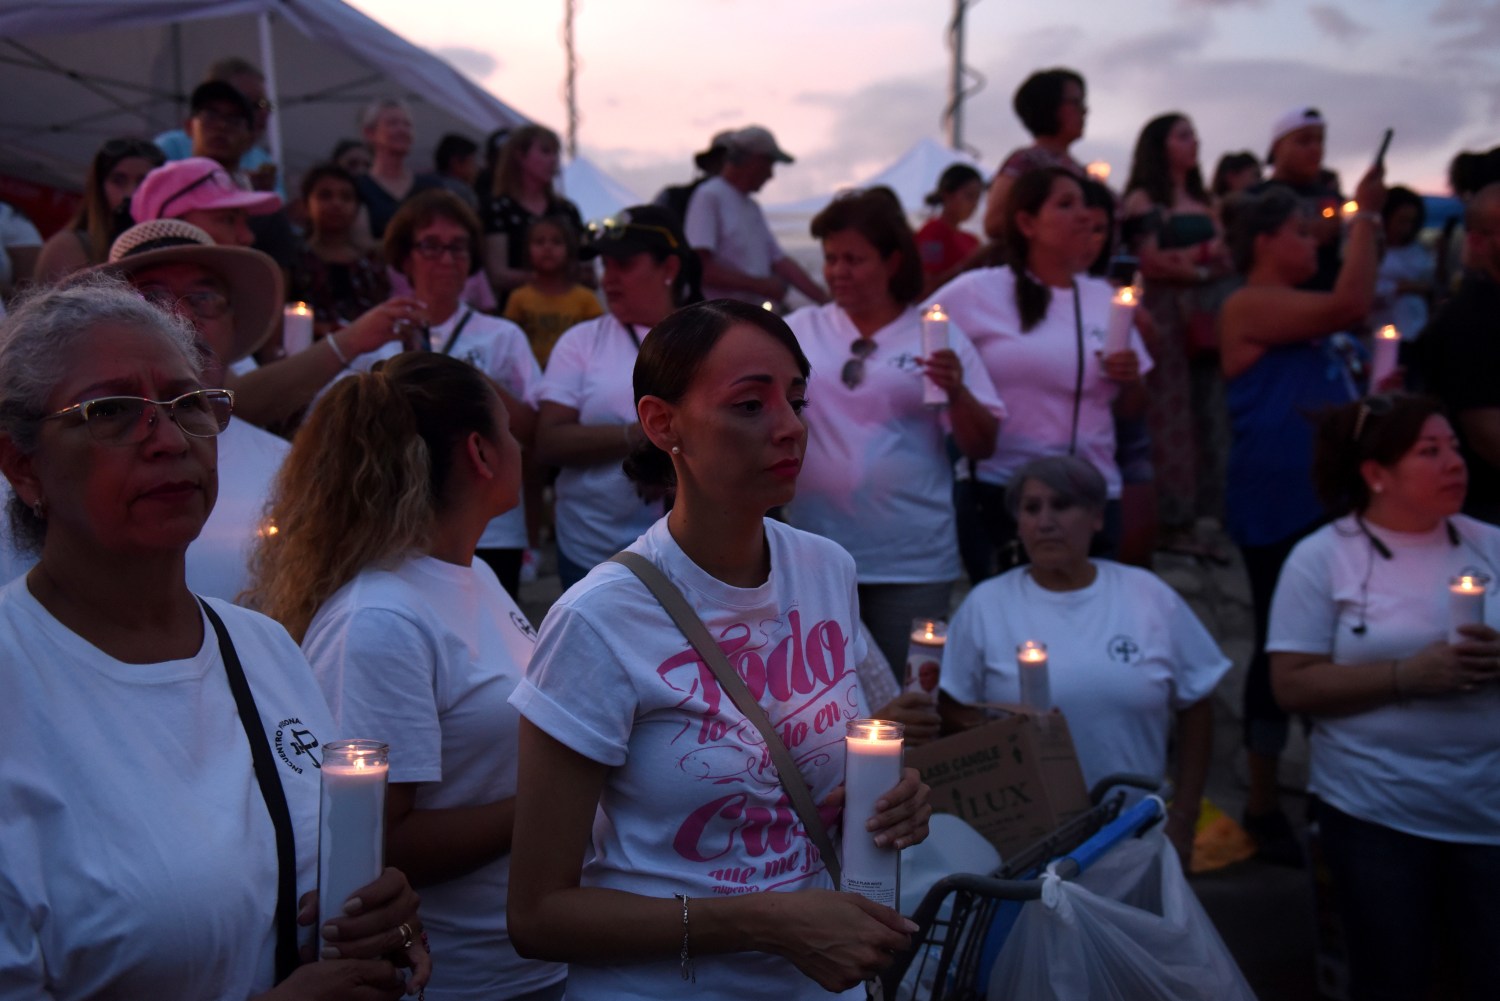 A group of people hold candles during a vigil at a memorial four days after a mass shooting at a Walmart store in El Paso, Texas, U.S. August 7, 2019.  REUTERS/Callaghan O'Hare - RC130E871640